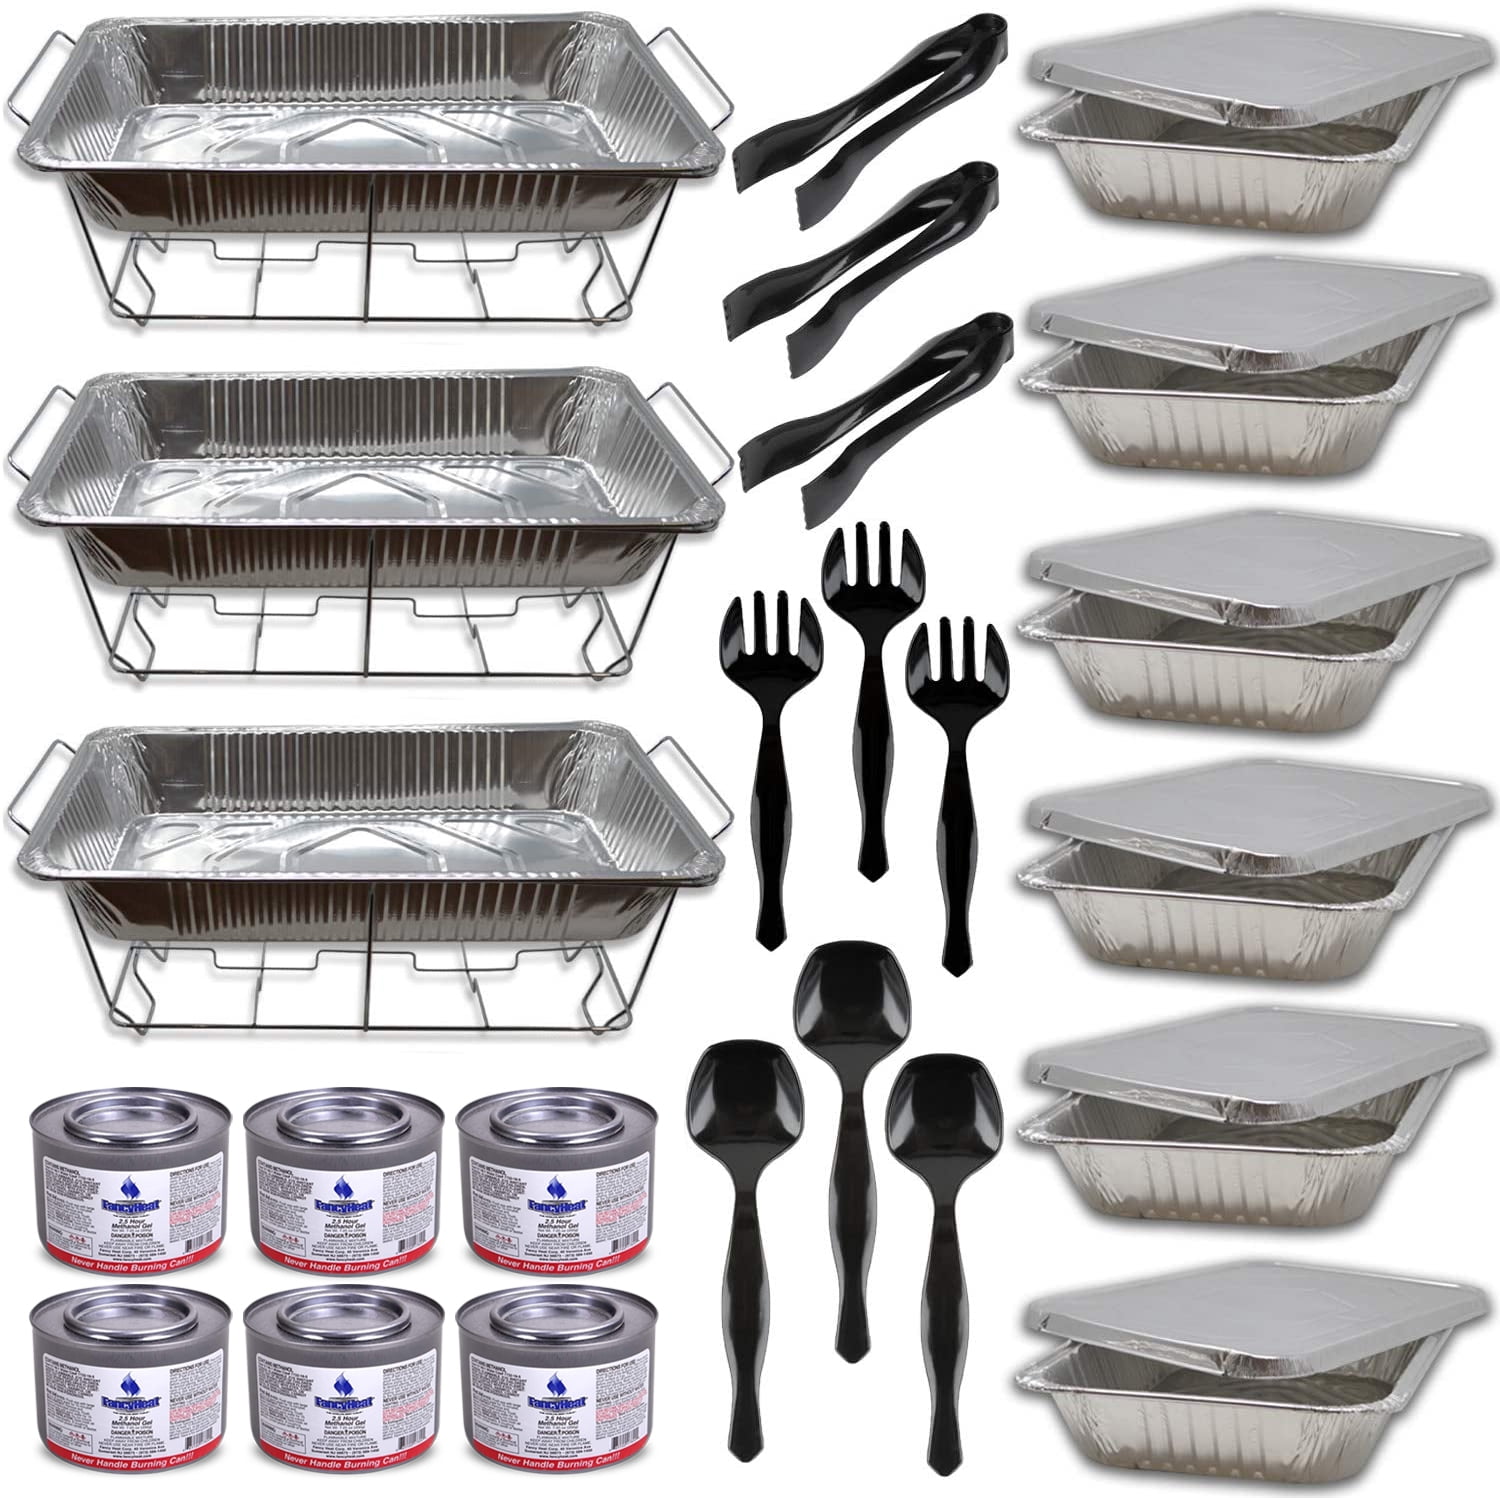 Disposable Chafing Dish Buffet Set, Food Warmers for Parties, Complete 33  Pcs of Chafing Servers with Covers, Catering Supplies with Full-Size Pans  (9x13), Warming Trays for Food with Utensils & Lids 